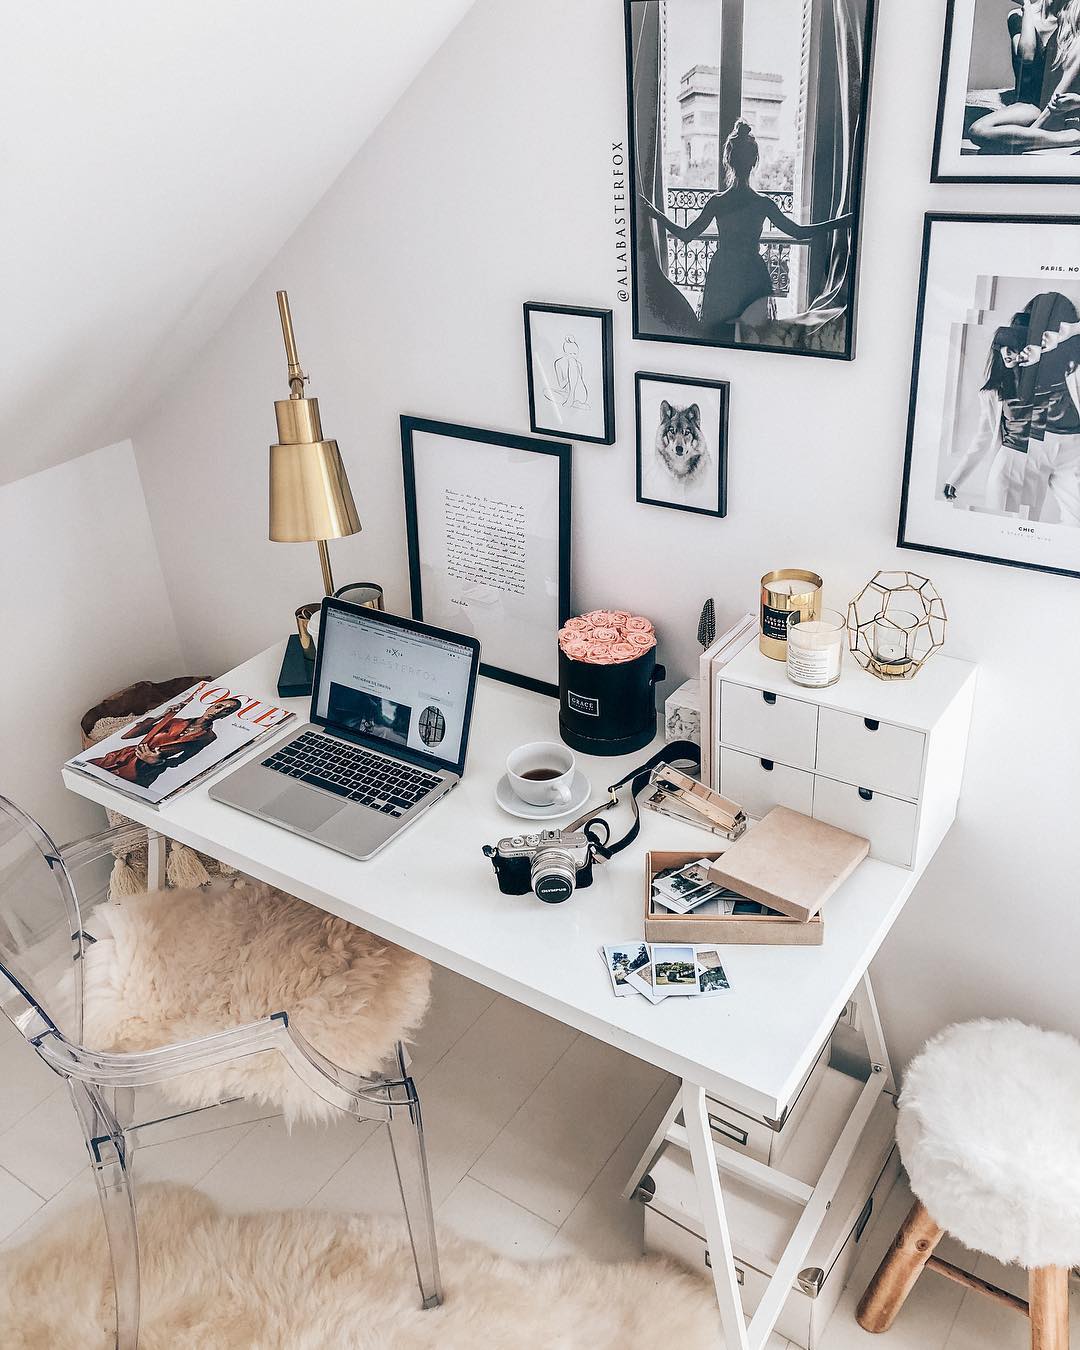 small white desk and clear chair with gold lamp on the desk in tiny room photo by Instagram user @alabasterfox